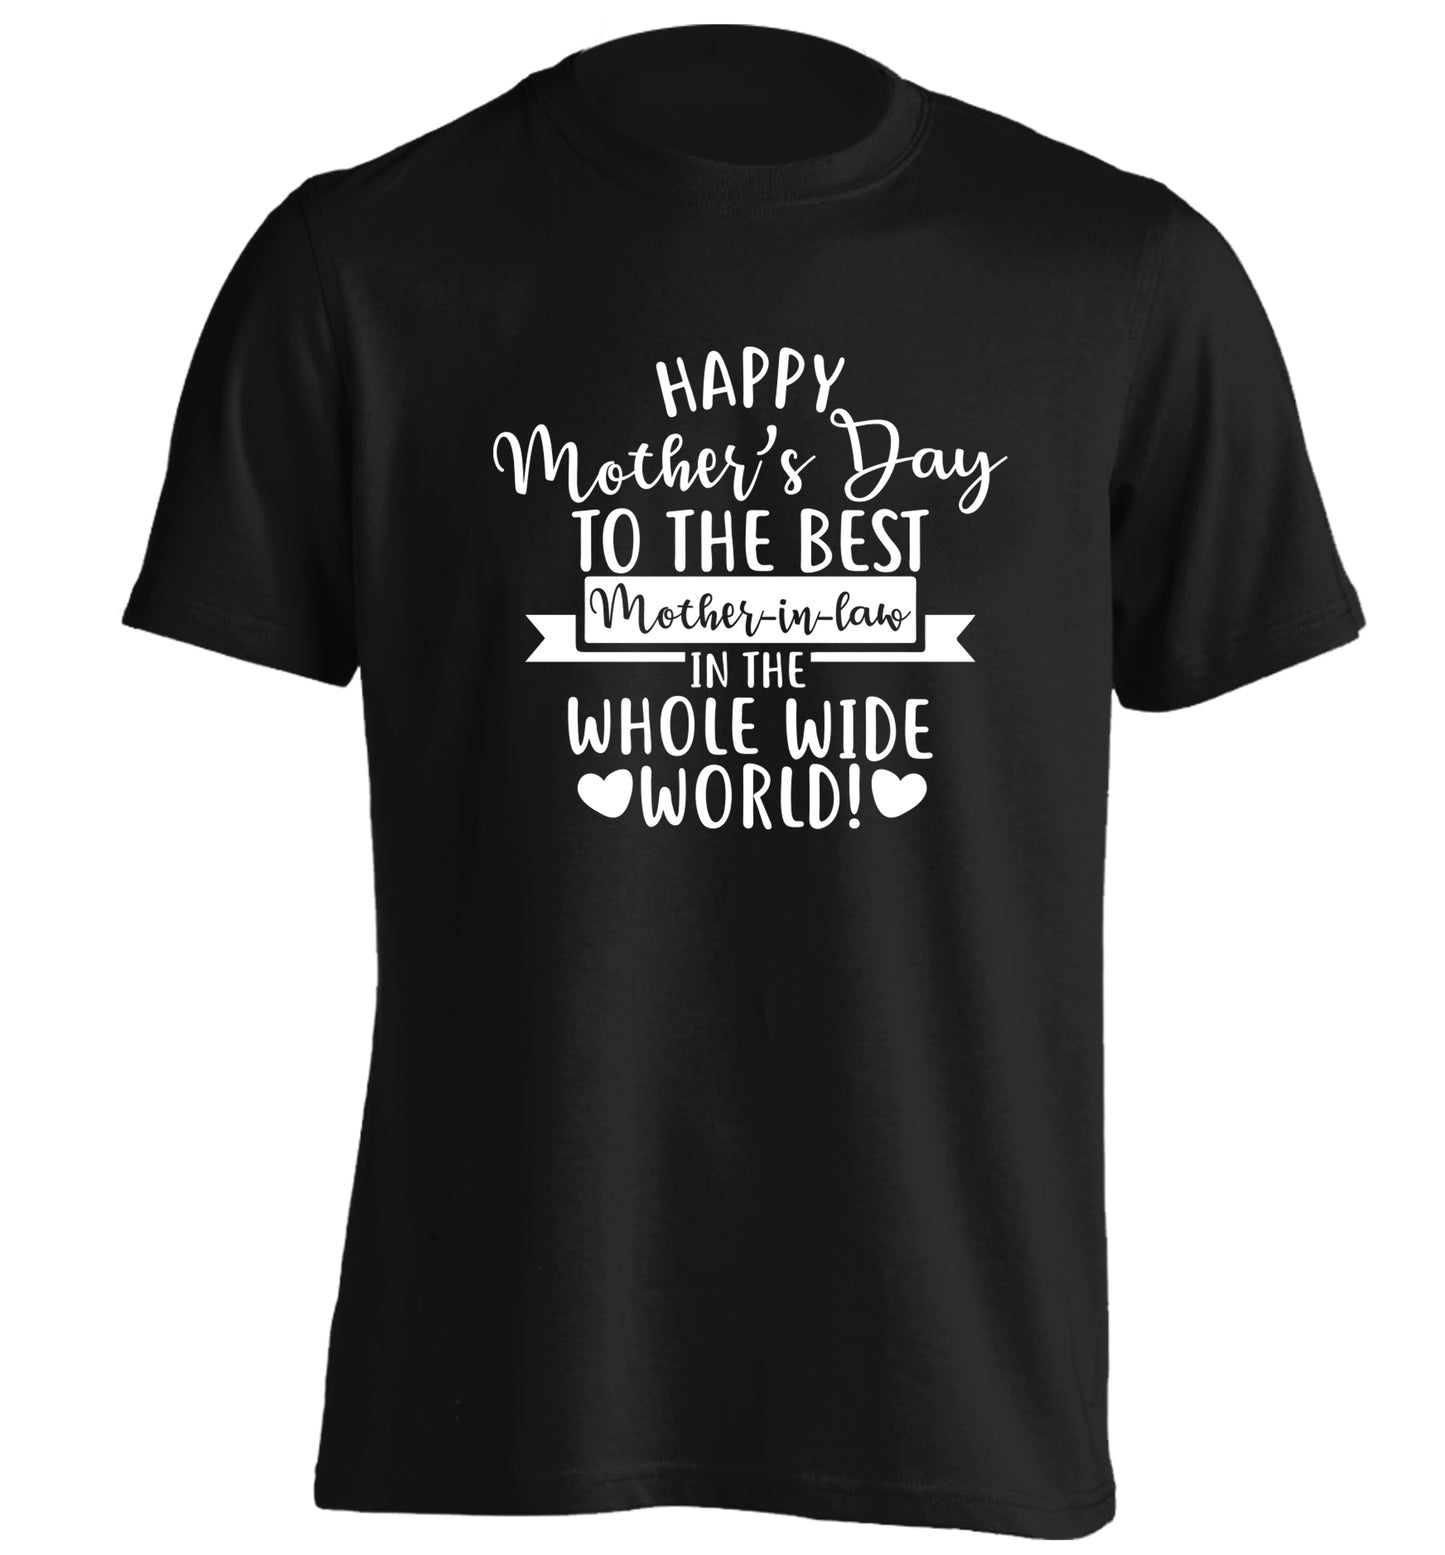 Happy mother's day to the best mother-in-law in the world adults unisex black Tshirt 2XL